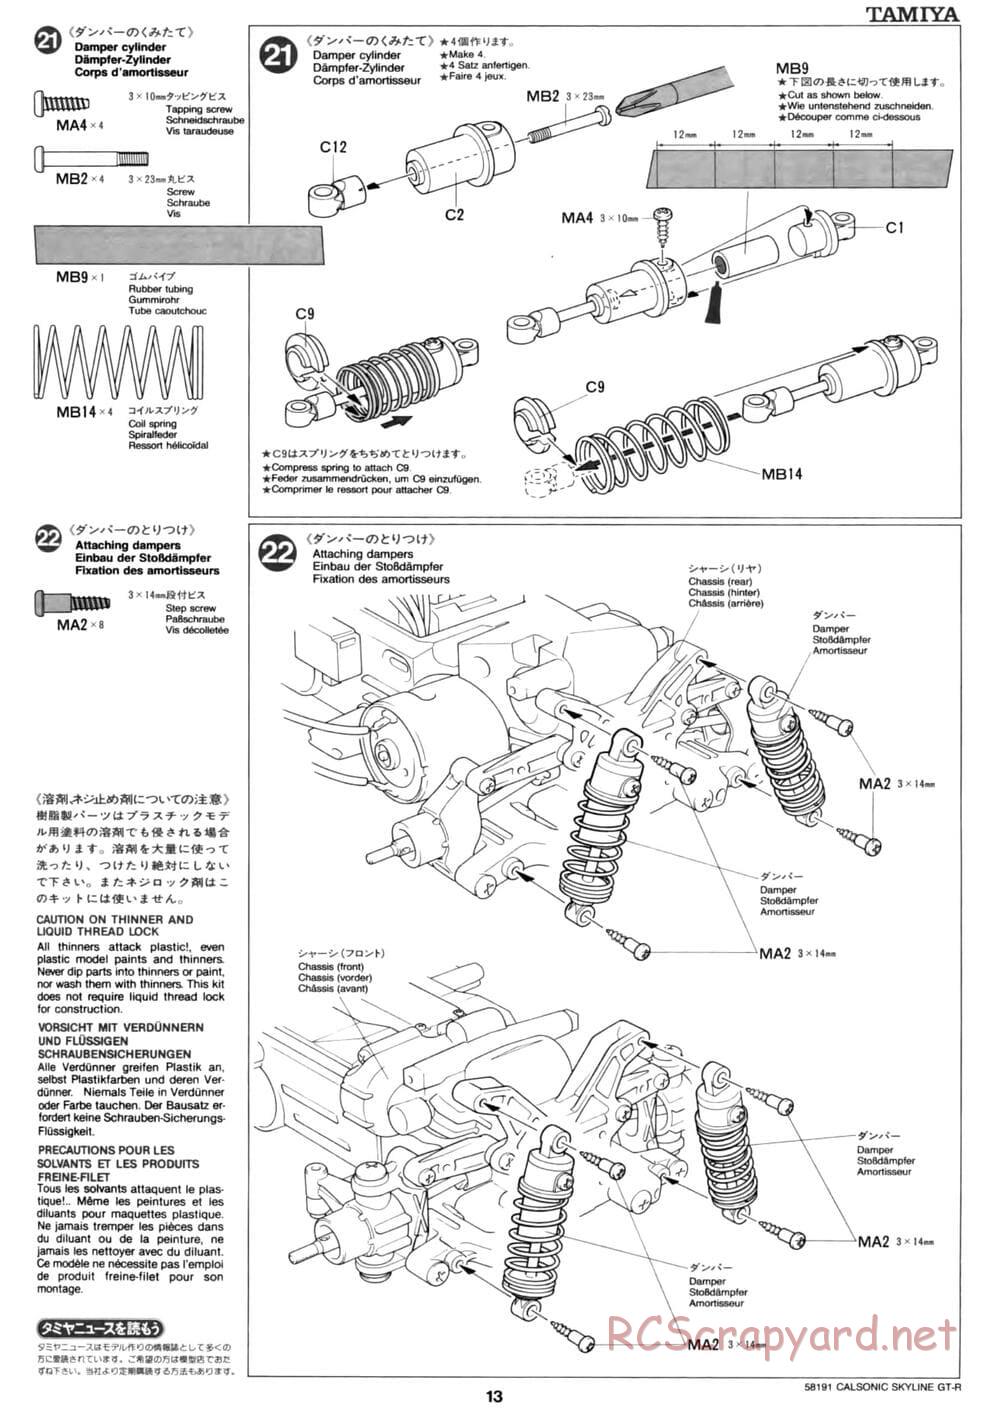 Tamiya - Calsonic Skyline GT-R - TL-01 Chassis - Manual - Page 13